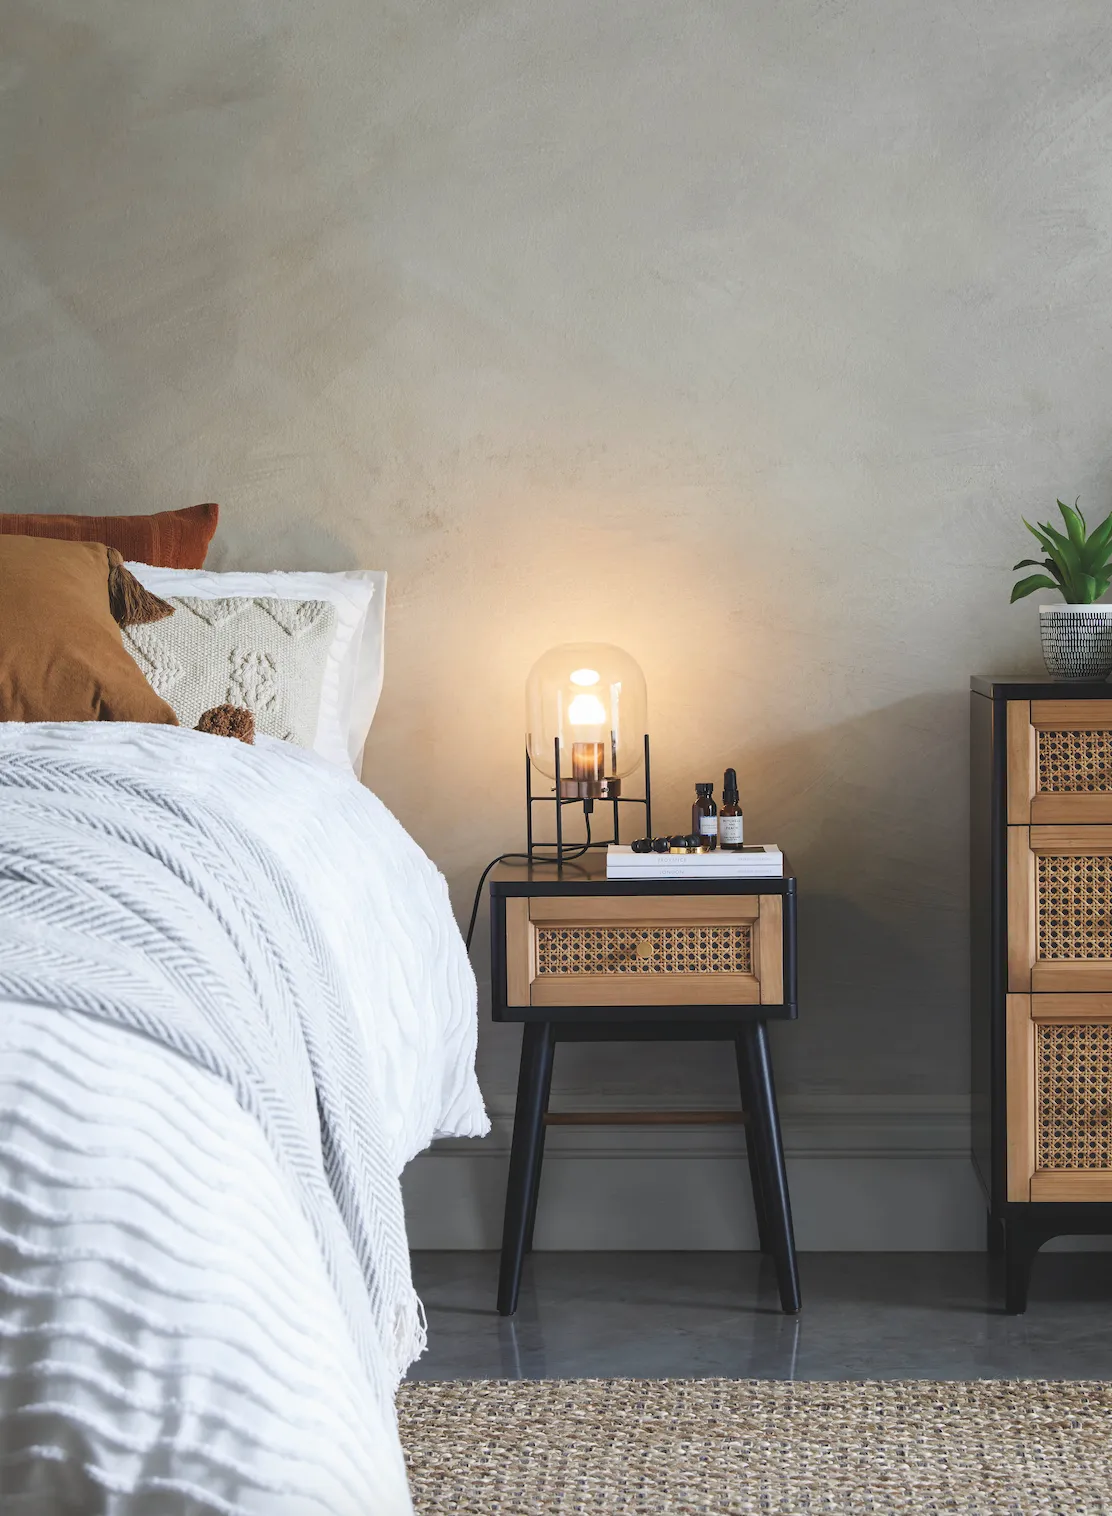 Dunelm’s new Retreat range aims to create a calming sanctuary with a mix of neutral and typically autumnal colours, alongside natural textures such as jute, wood and rattan. Franco side table, £69; Dayo Jardinere glass table lamp, £28, both Dunelm